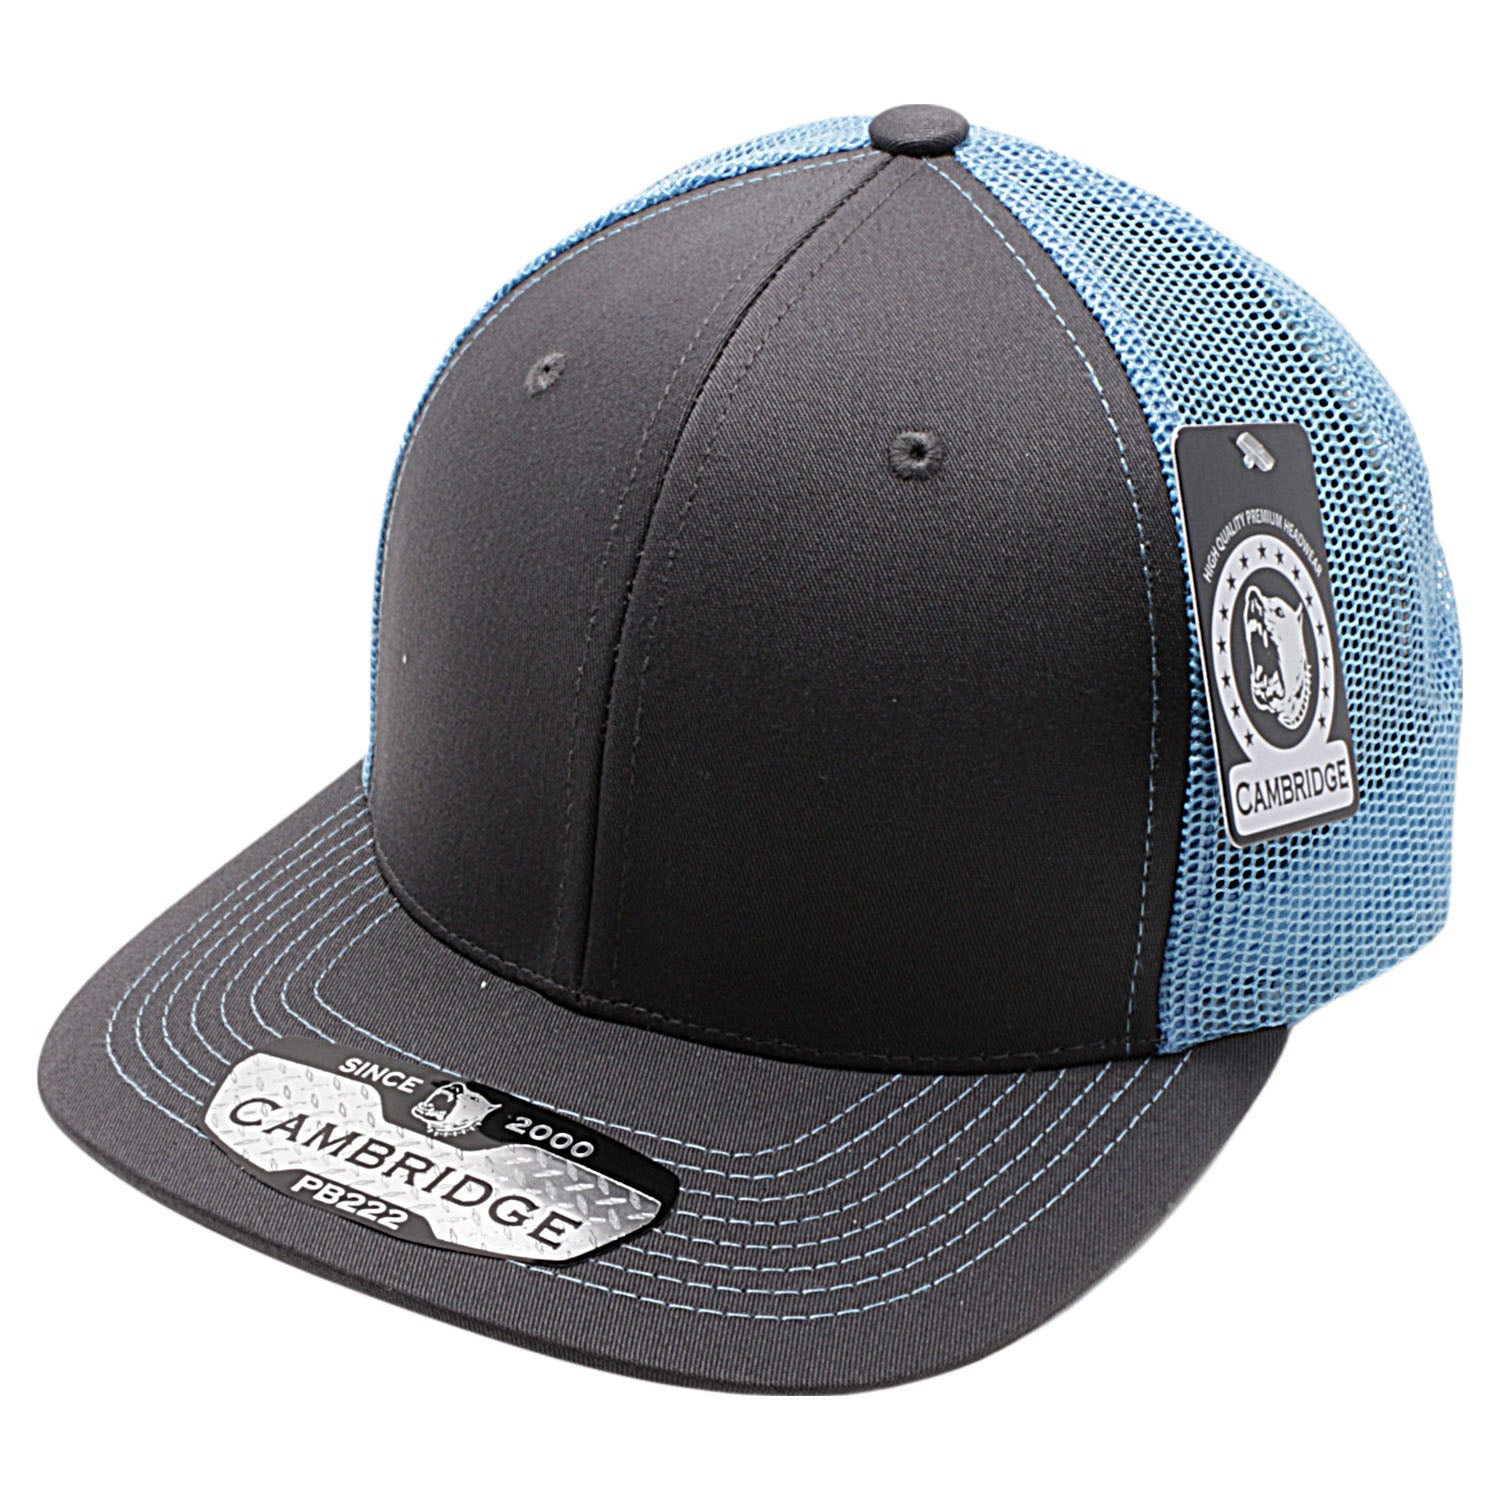 Shed Trucker Hat - Charcoal & Columbia - Watershed Drybags